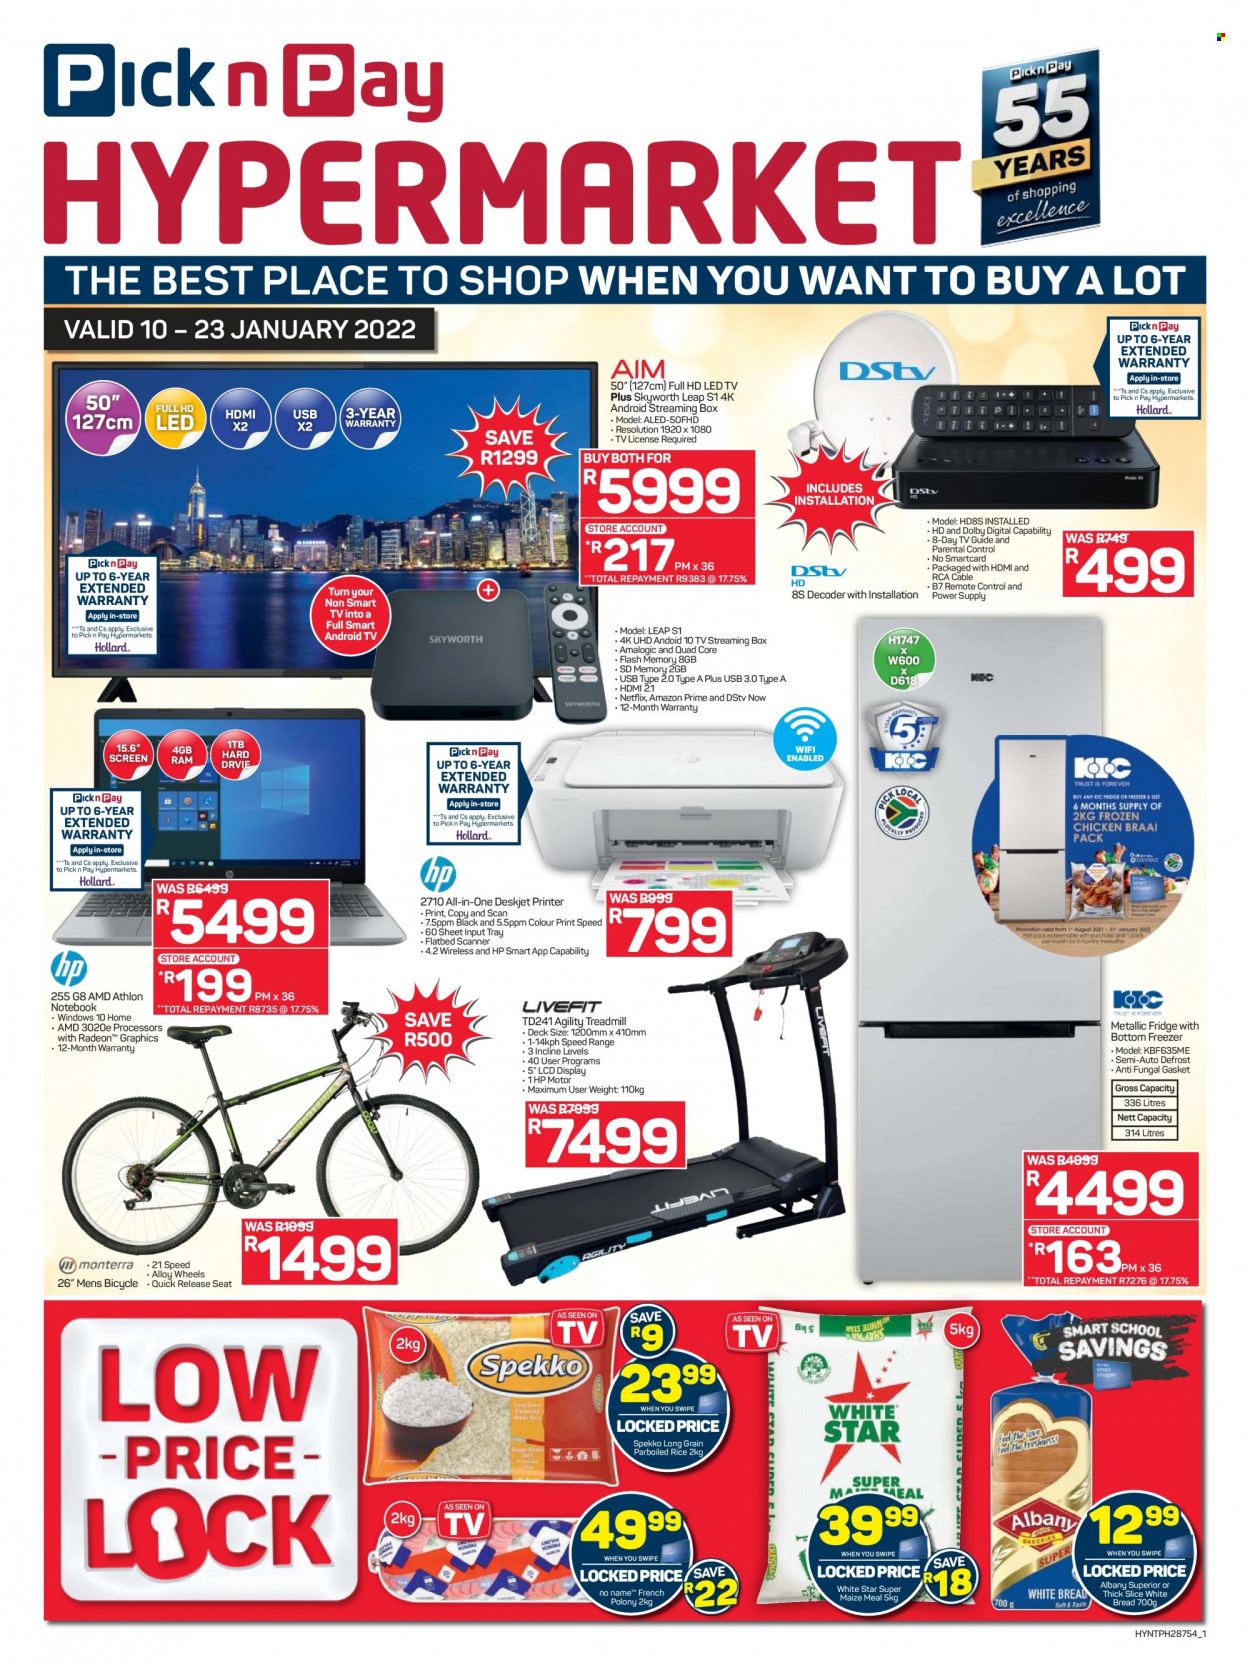 Pick n Pay Hypermarket catalogue  - 10/01/2022 - 23/01/2022 - Sales products - Windows 10, bread, white bread, french polony, polony, maize meal, White Star, rice, parboiled rice, Spekko, notebook, Athlon, RCA, Android TV, LED TV, smart tv, Skyworth, streaming box, decoder, remote control, freezer, refrigerator, fridge, printer, scanner, treadmill, bike. Page 1.